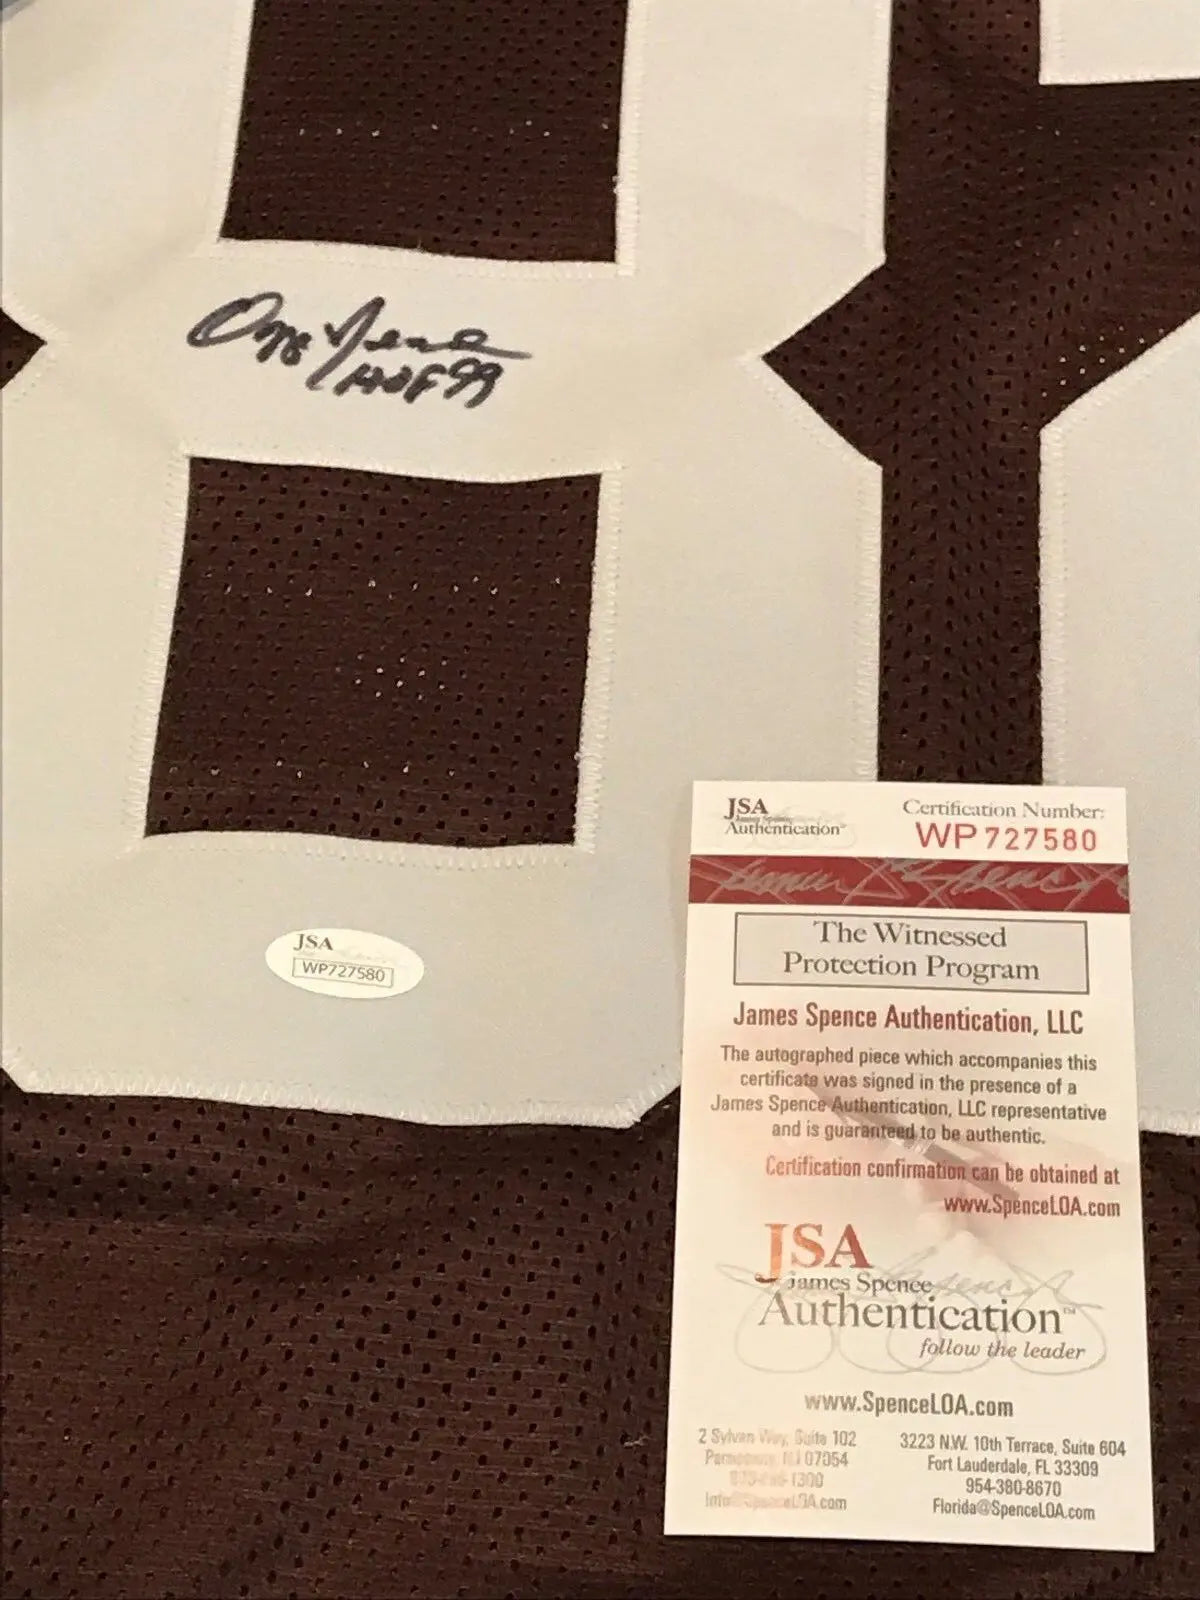 MVP Authentics Cleveland Browns Ozzie Newsome Autographed Signed Inscribed Jersey Jsa Coa 107.10 sports jersey framing , jersey framing